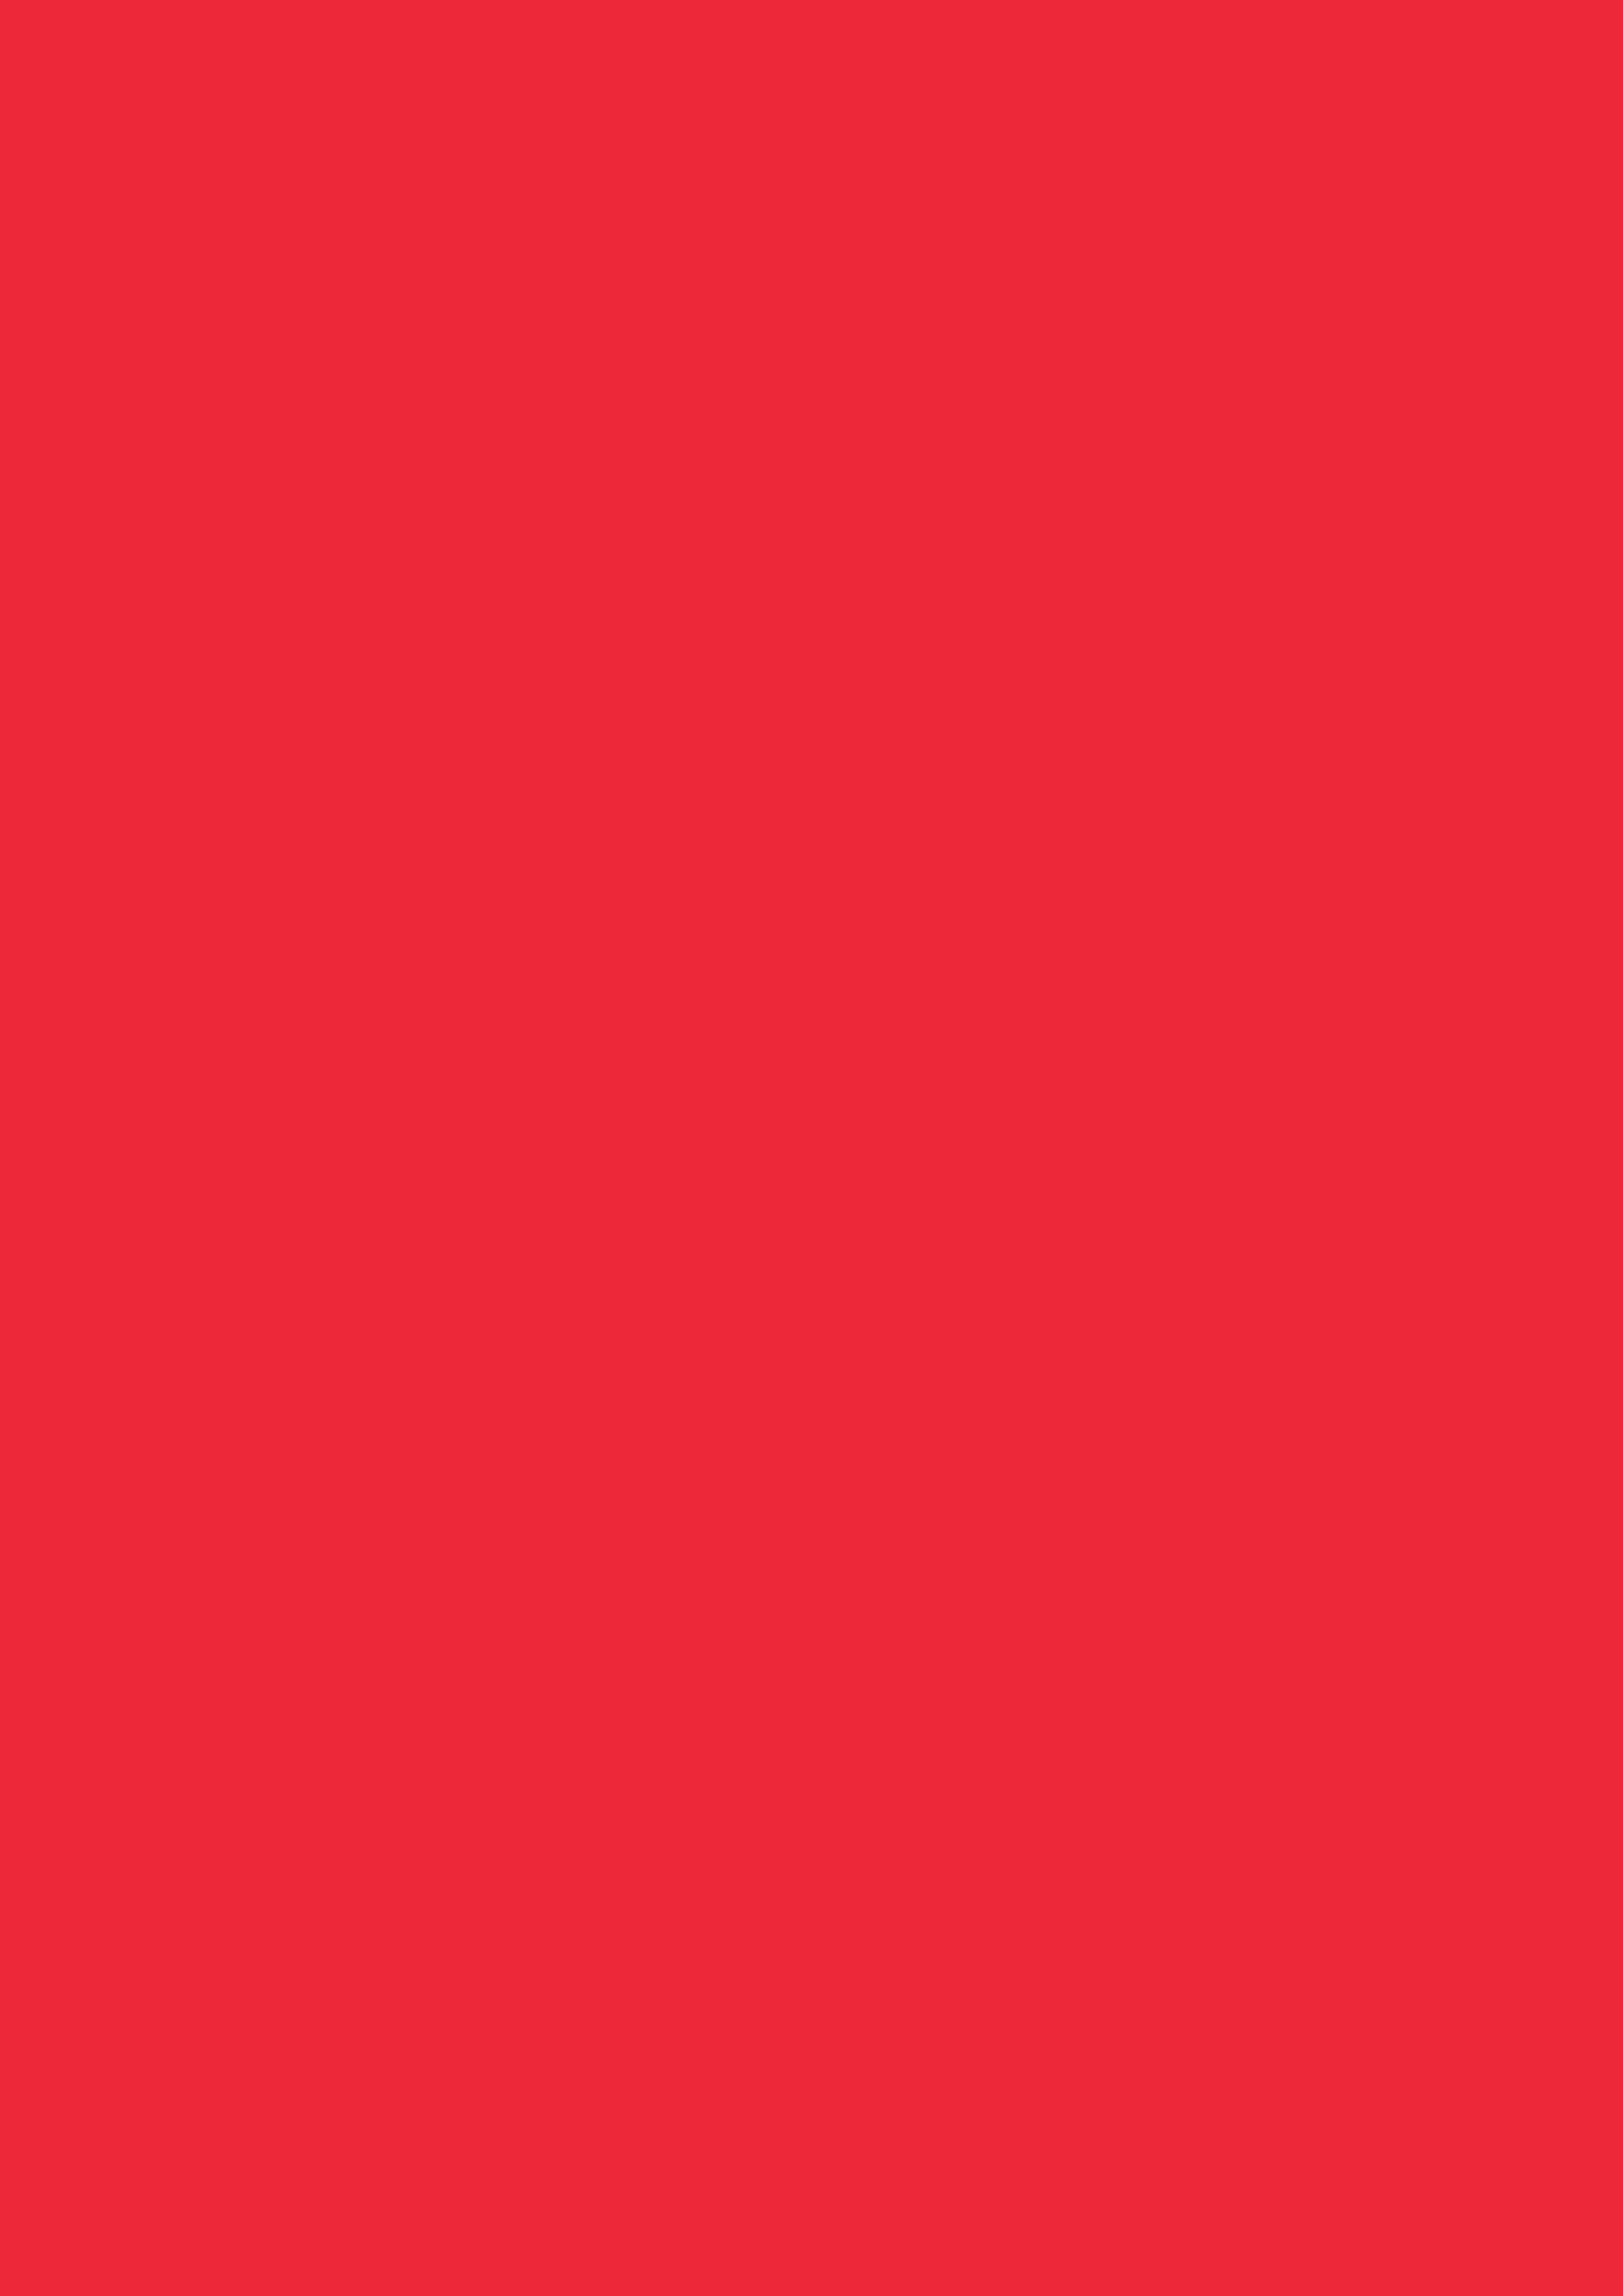 2480x3508 Imperial Red Solid Color Background